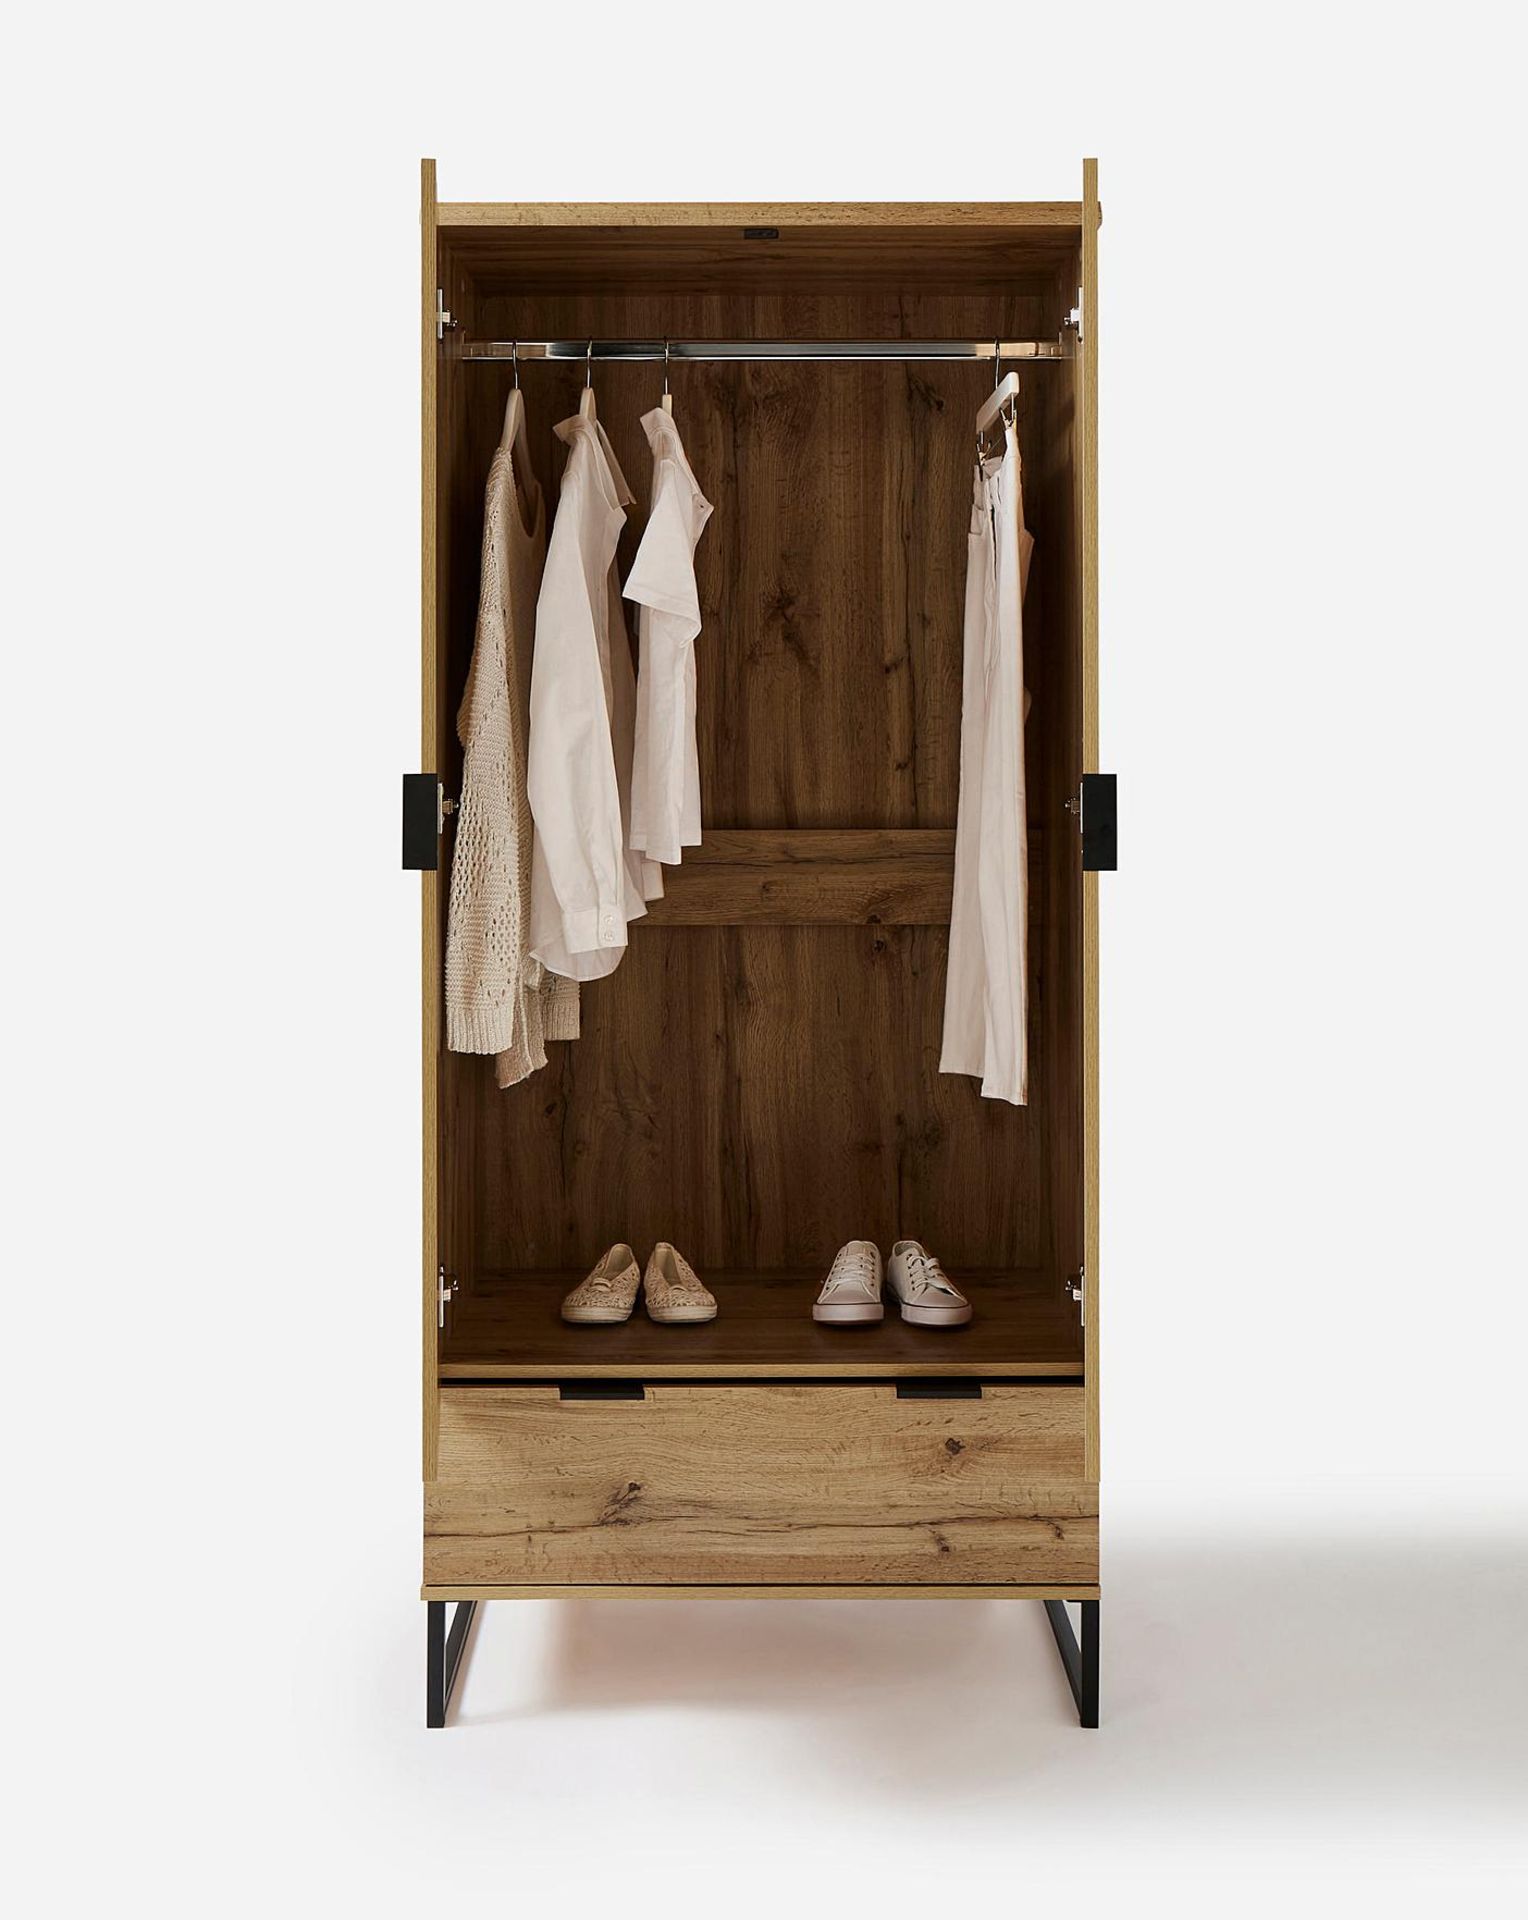 BRAND NEW Oak Shoreditch Wardrobe. RRP £299 EACH. The Shoreditch Range has a contemporary and - Image 3 of 3